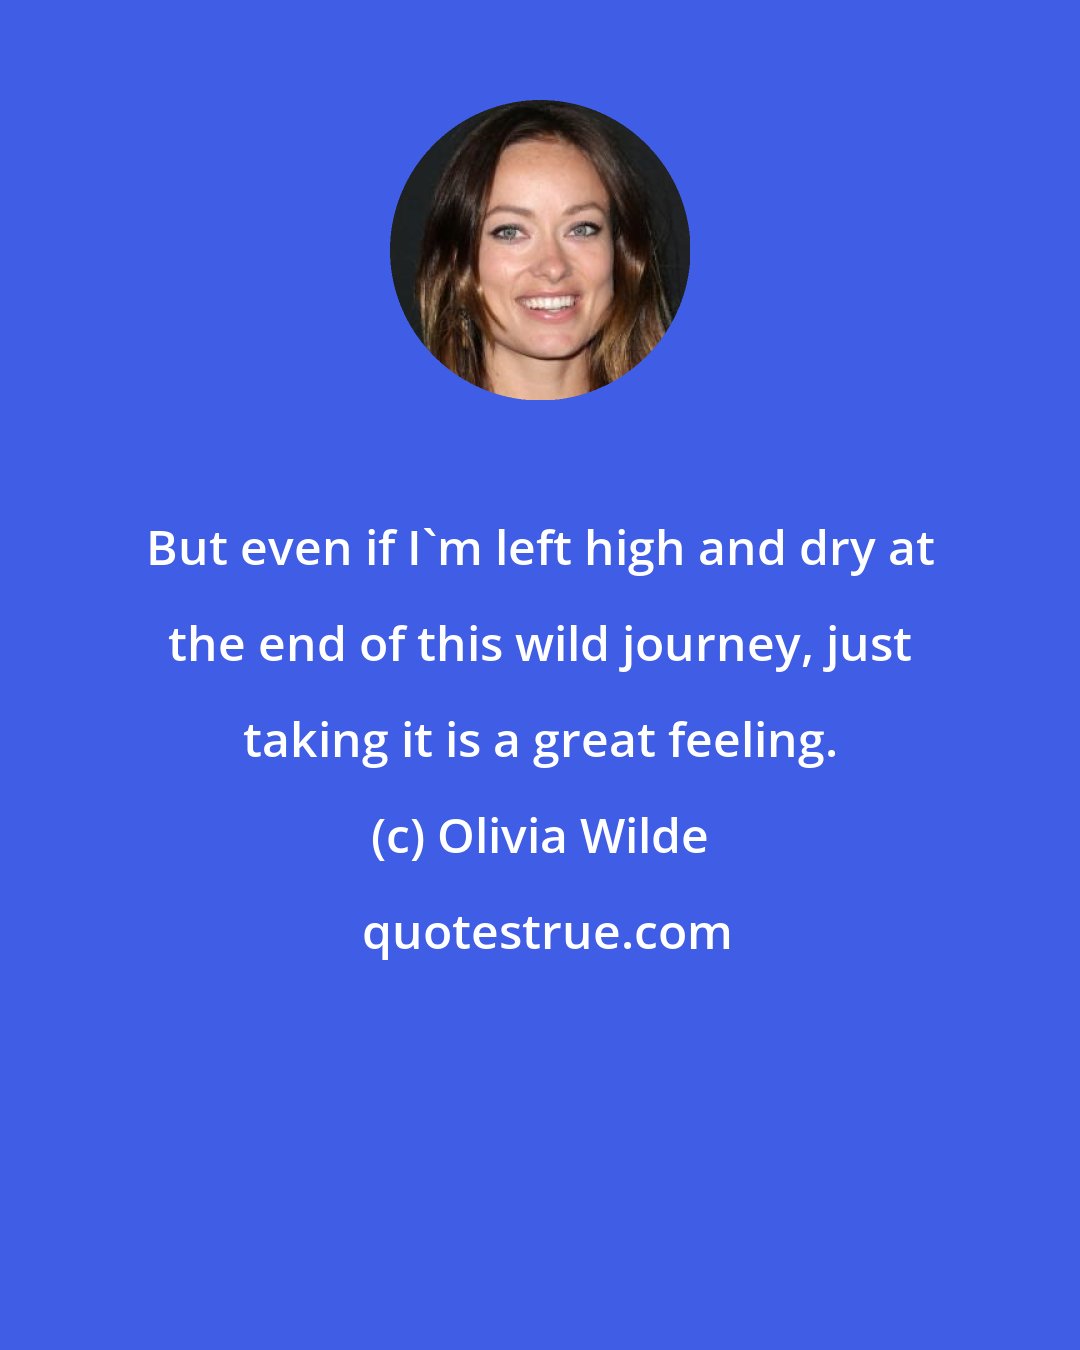 Olivia Wilde: But even if I'm left high and dry at the end of this wild journey, just taking it is a great feeling.